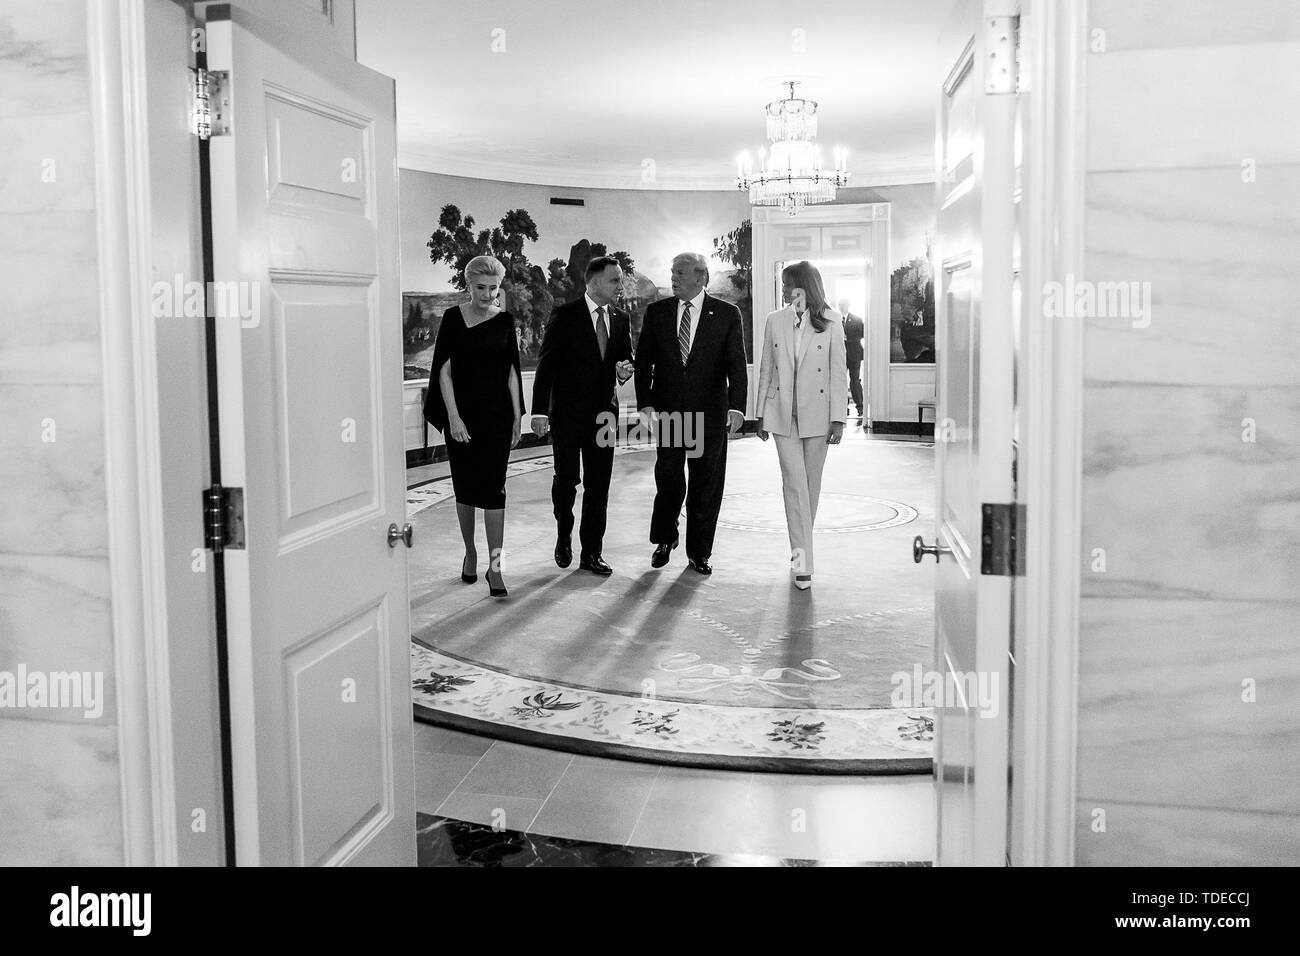 Washington, United States Of America. 12th June, 2019. President Donald J. Trump and First Lady Melania Trump talk with the President of Poland Andrzej Duda and his wife Mrs. Agata Kornhauser-Duda Wednesday, June 12, 2019, in the Diplomatic Reception Room of the White House People: President Donald J. Trump and First Lady Melania Trump, President of Poland Andrzej Duda, Mrs. Agata Kornhauser-Duda Credit: Storms Media Group/Alamy Live News Stock Photo